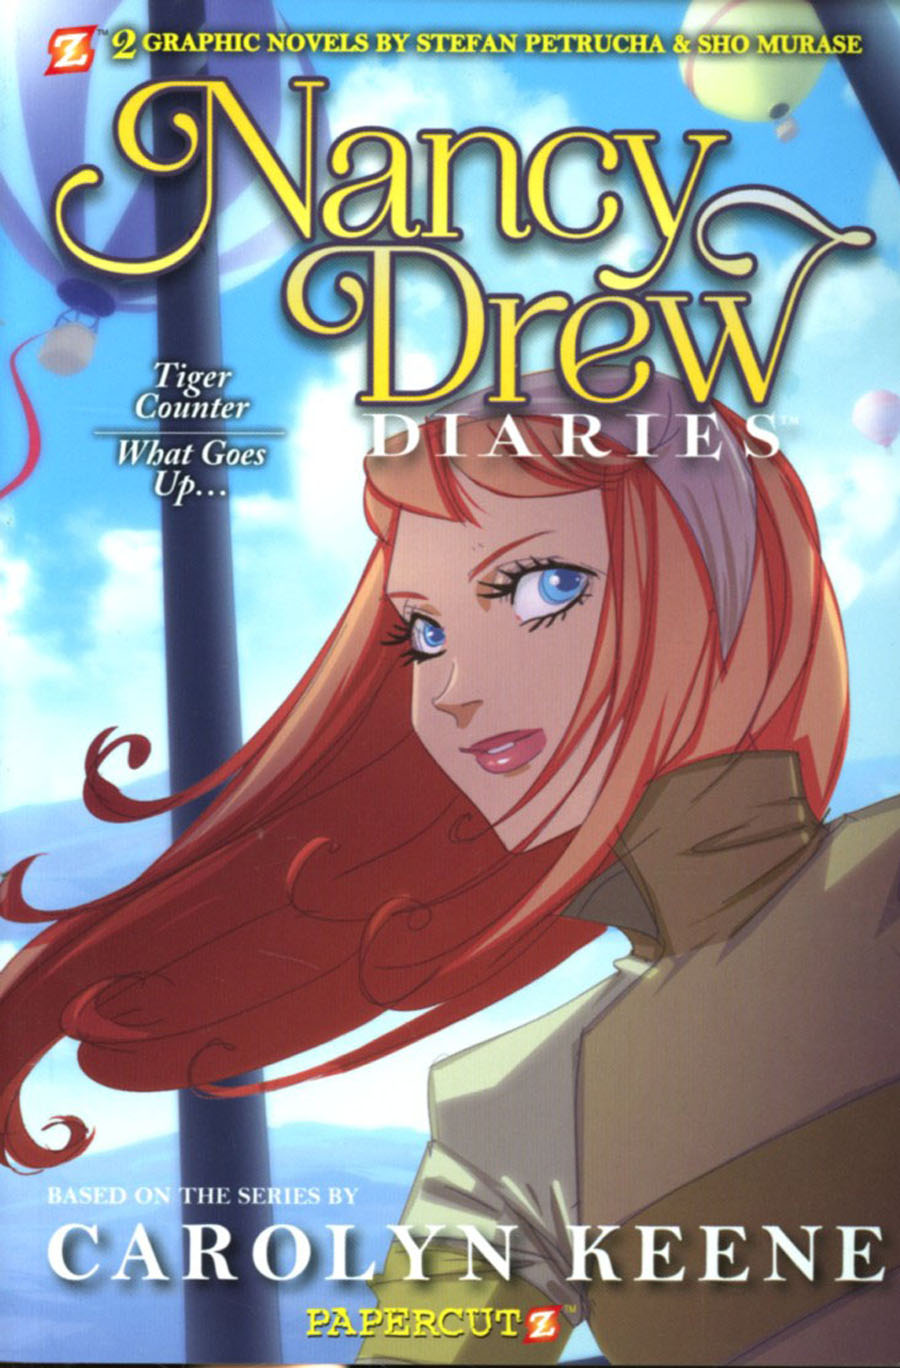 Nancy Drew Diaries Vol 8 Tiger Counter / What Goes Up TP